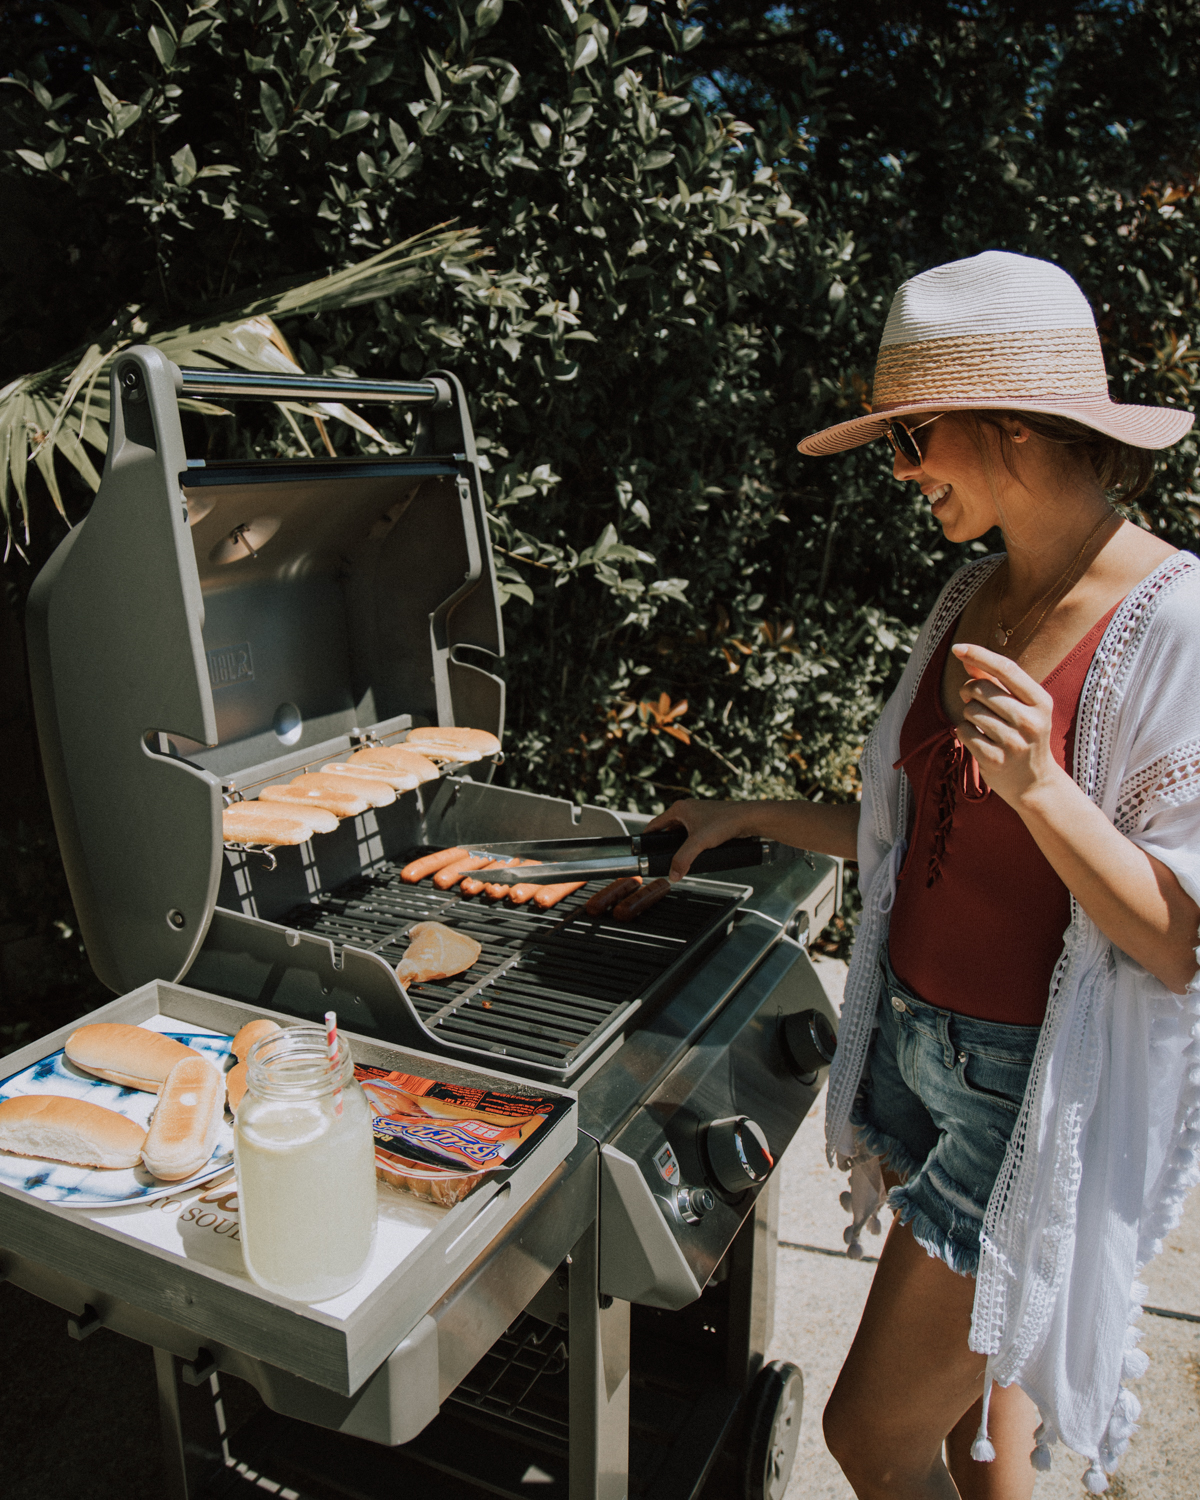 Summer is Coming – How to Pull Together a Last-Minute BBQ Party